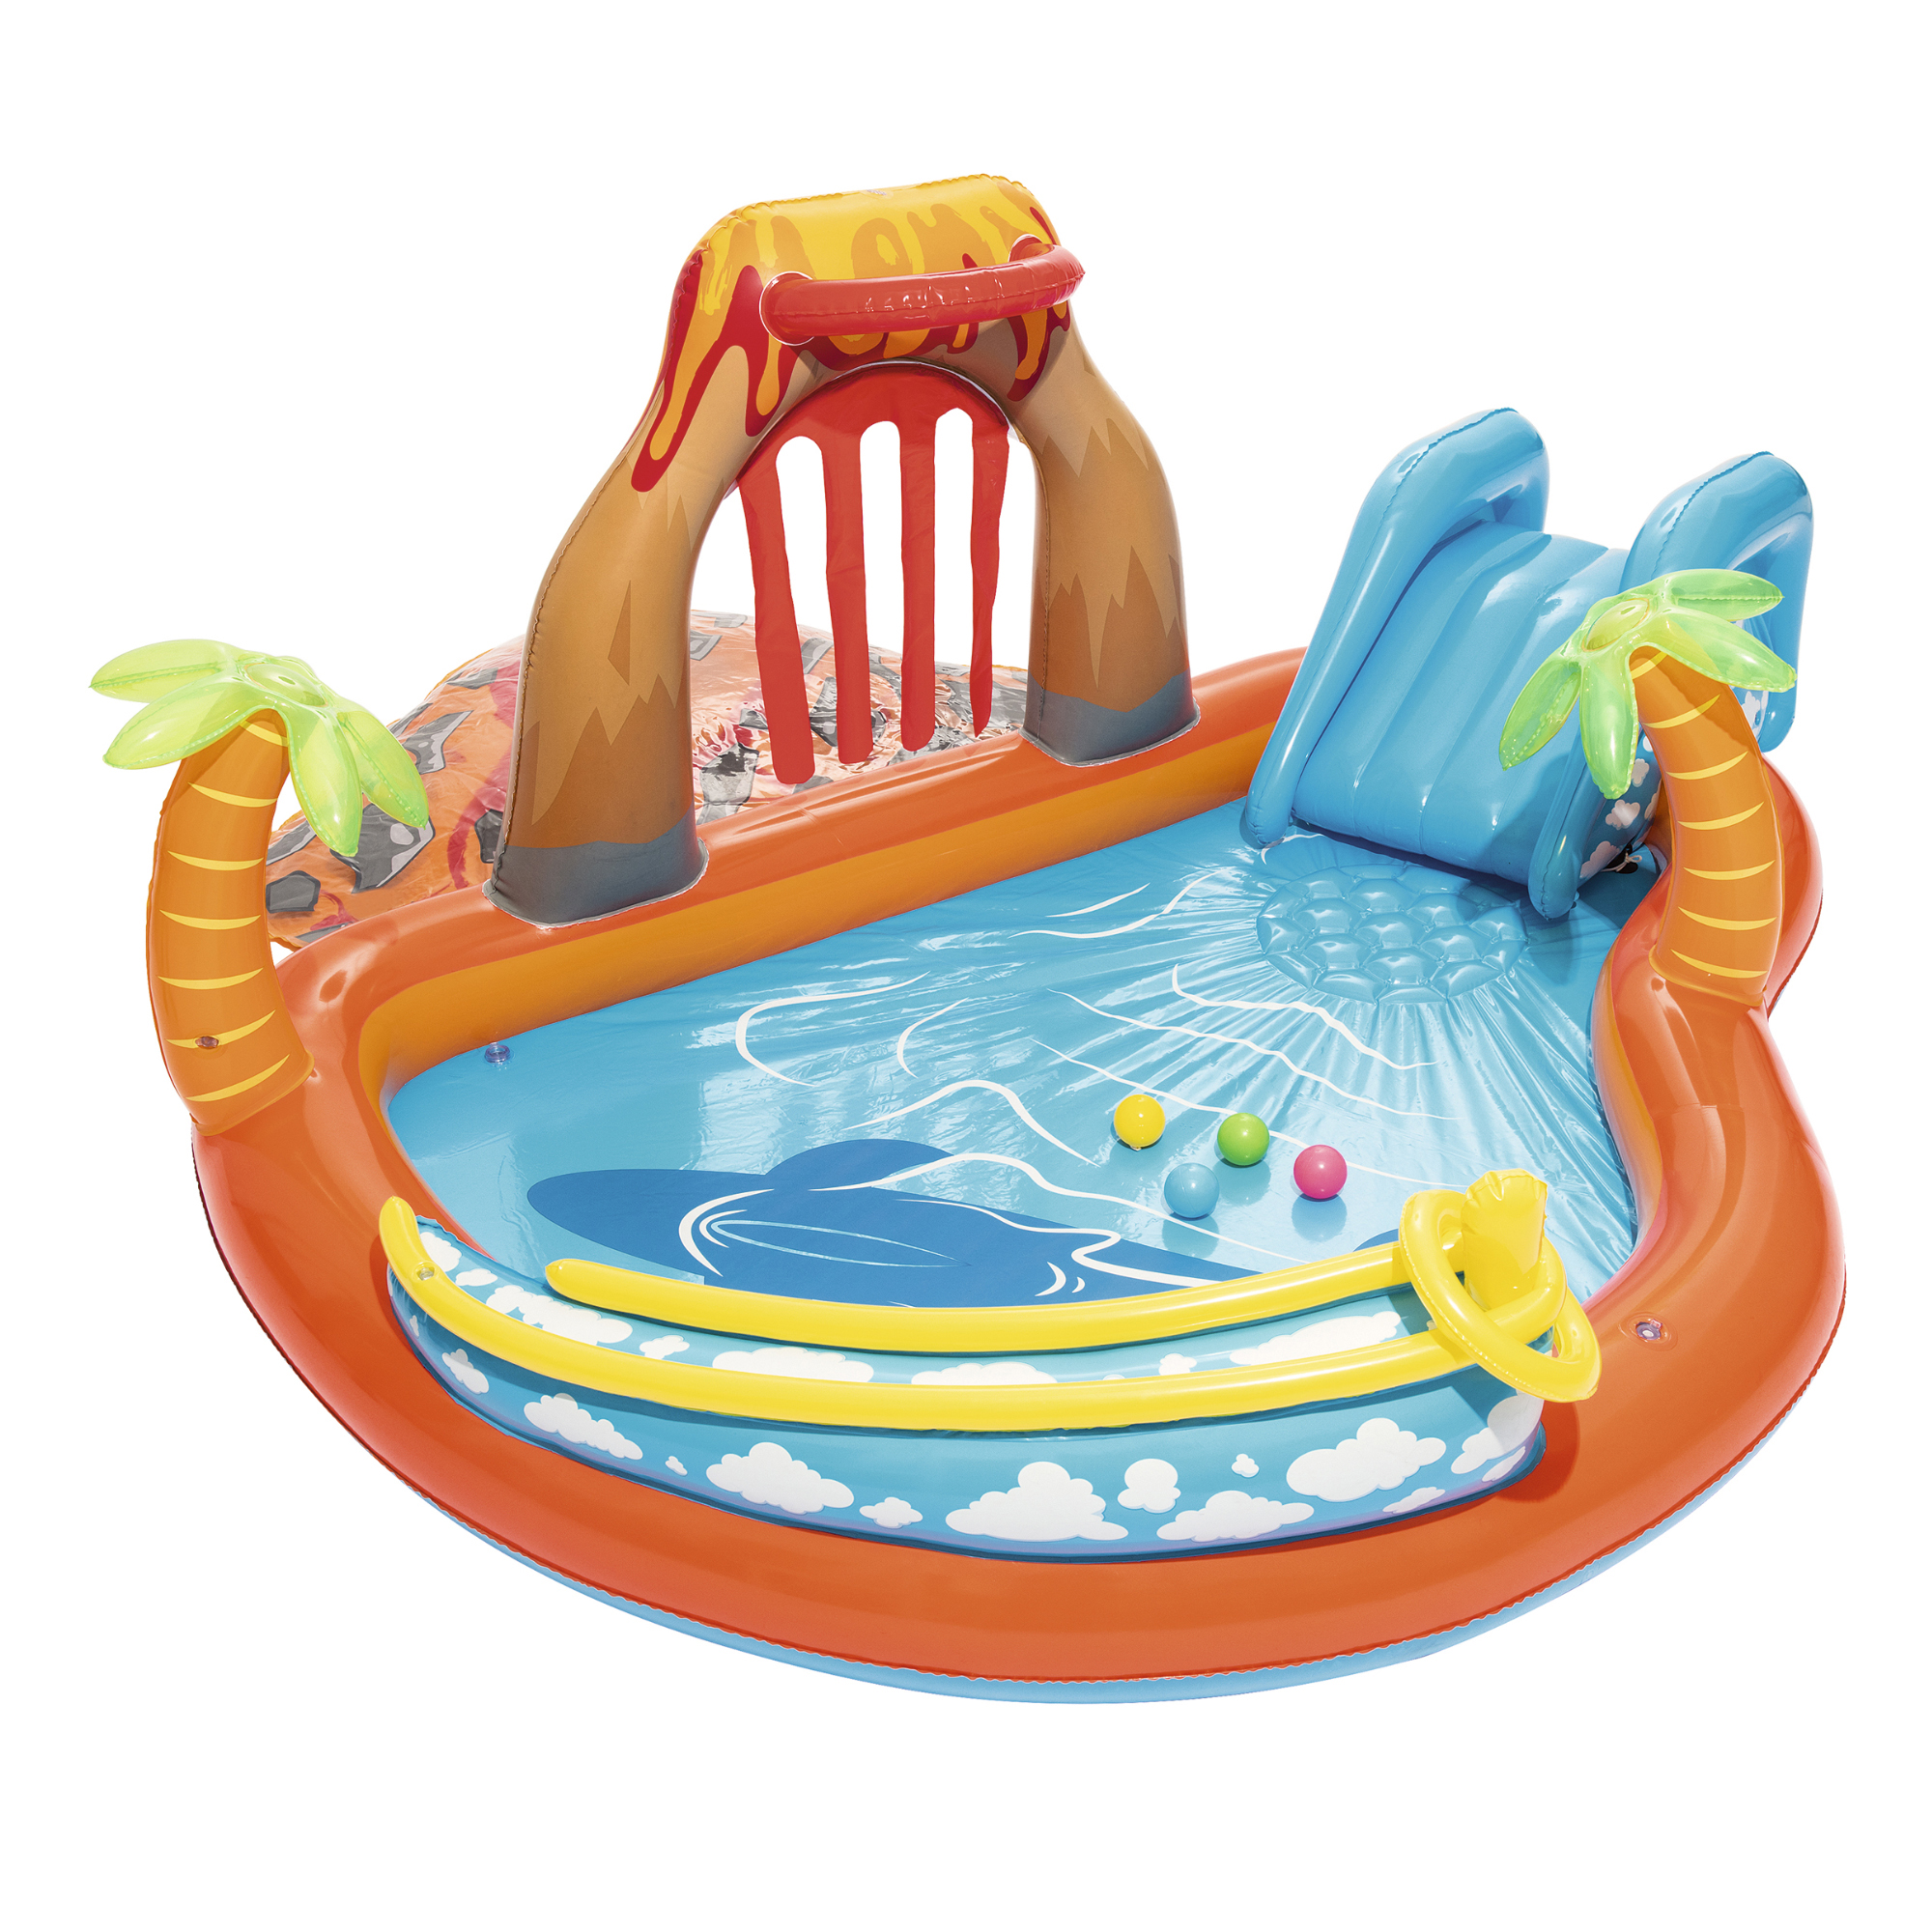 Bestway - H2OGO! 104 in. x 104 in. x 41 in. Lava Lagoon Play Center - image 1 of 8